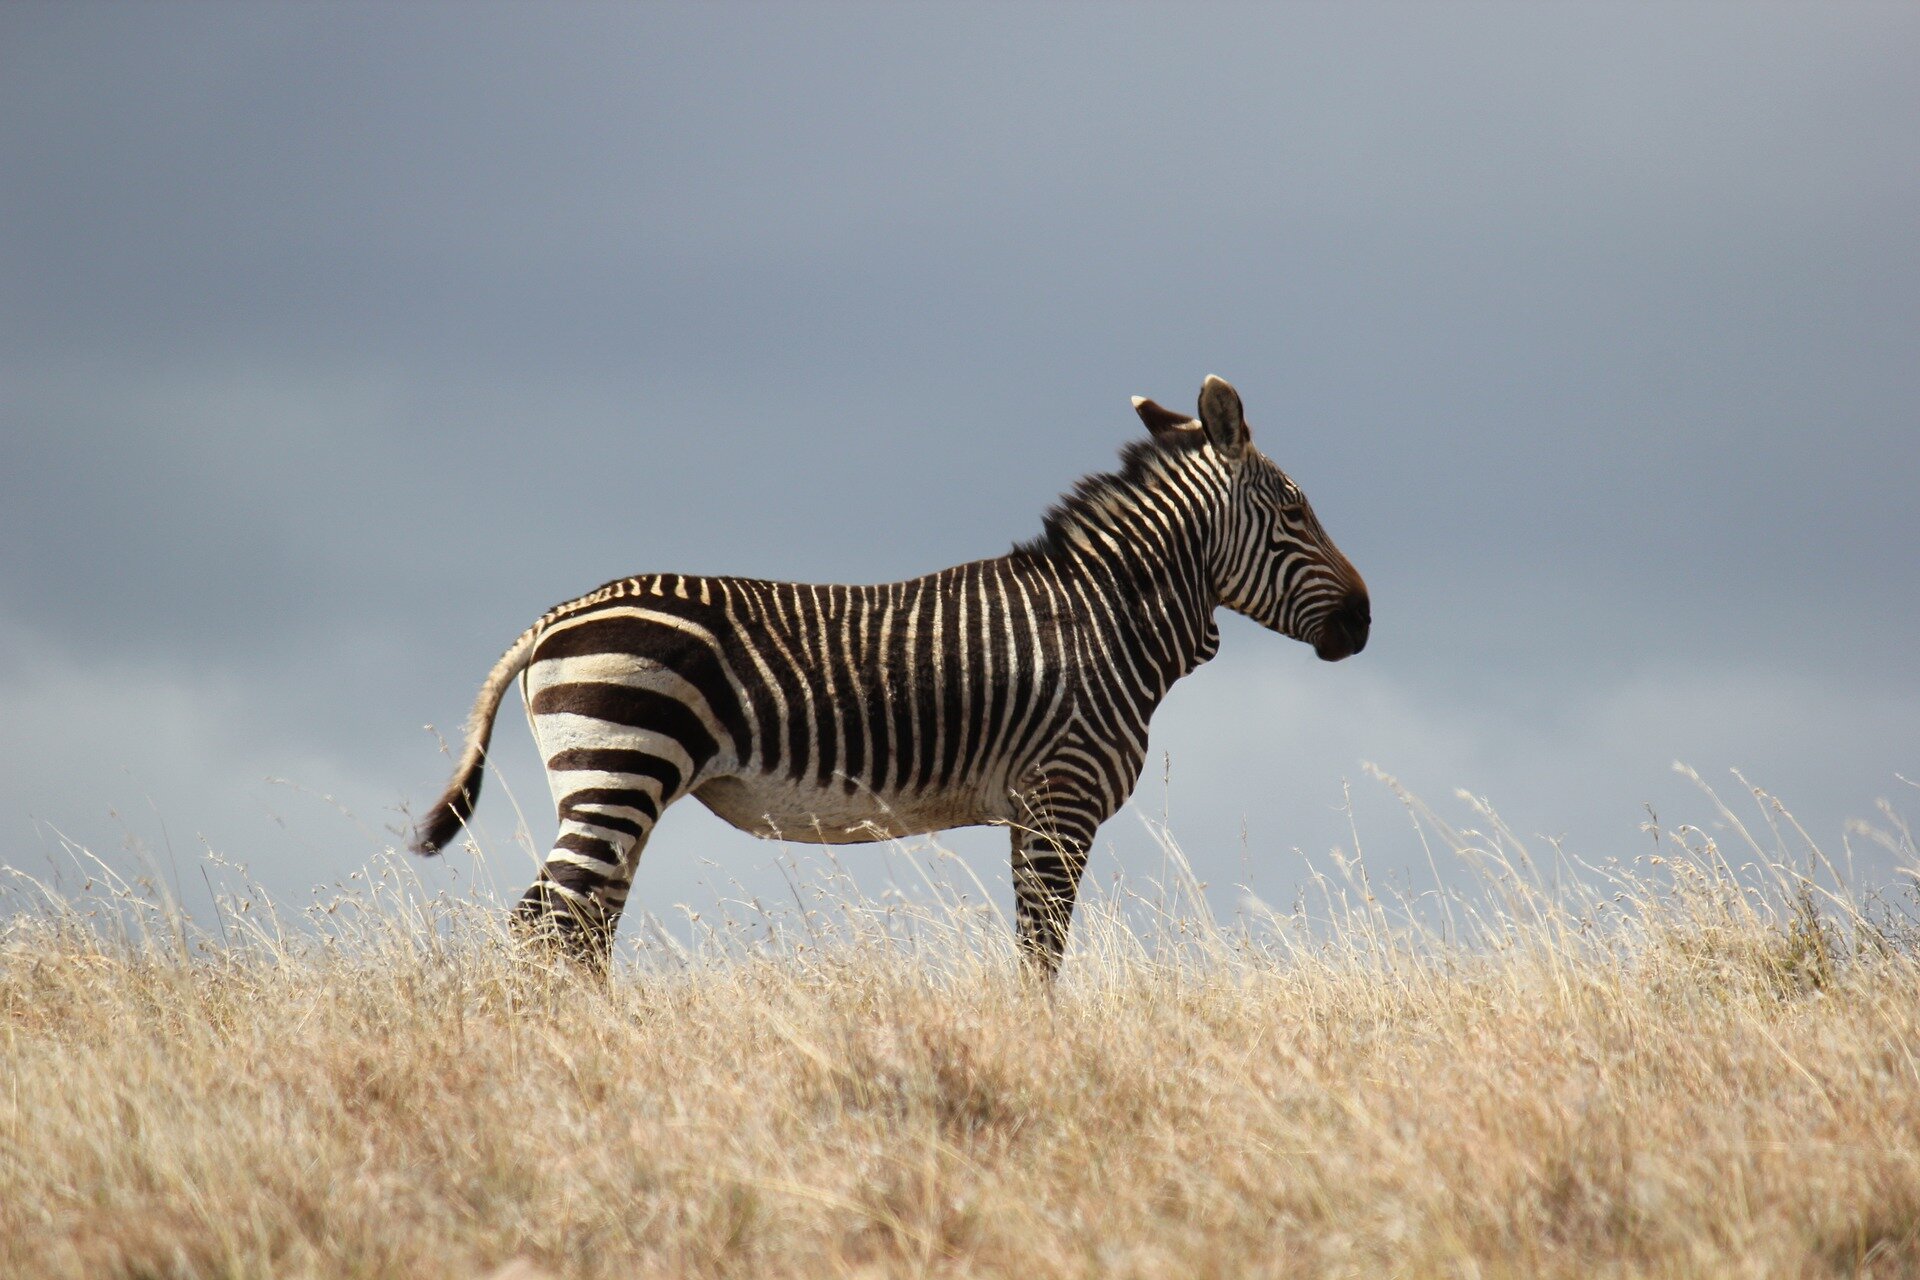 How vacation photos of zebras and whales can help conservation